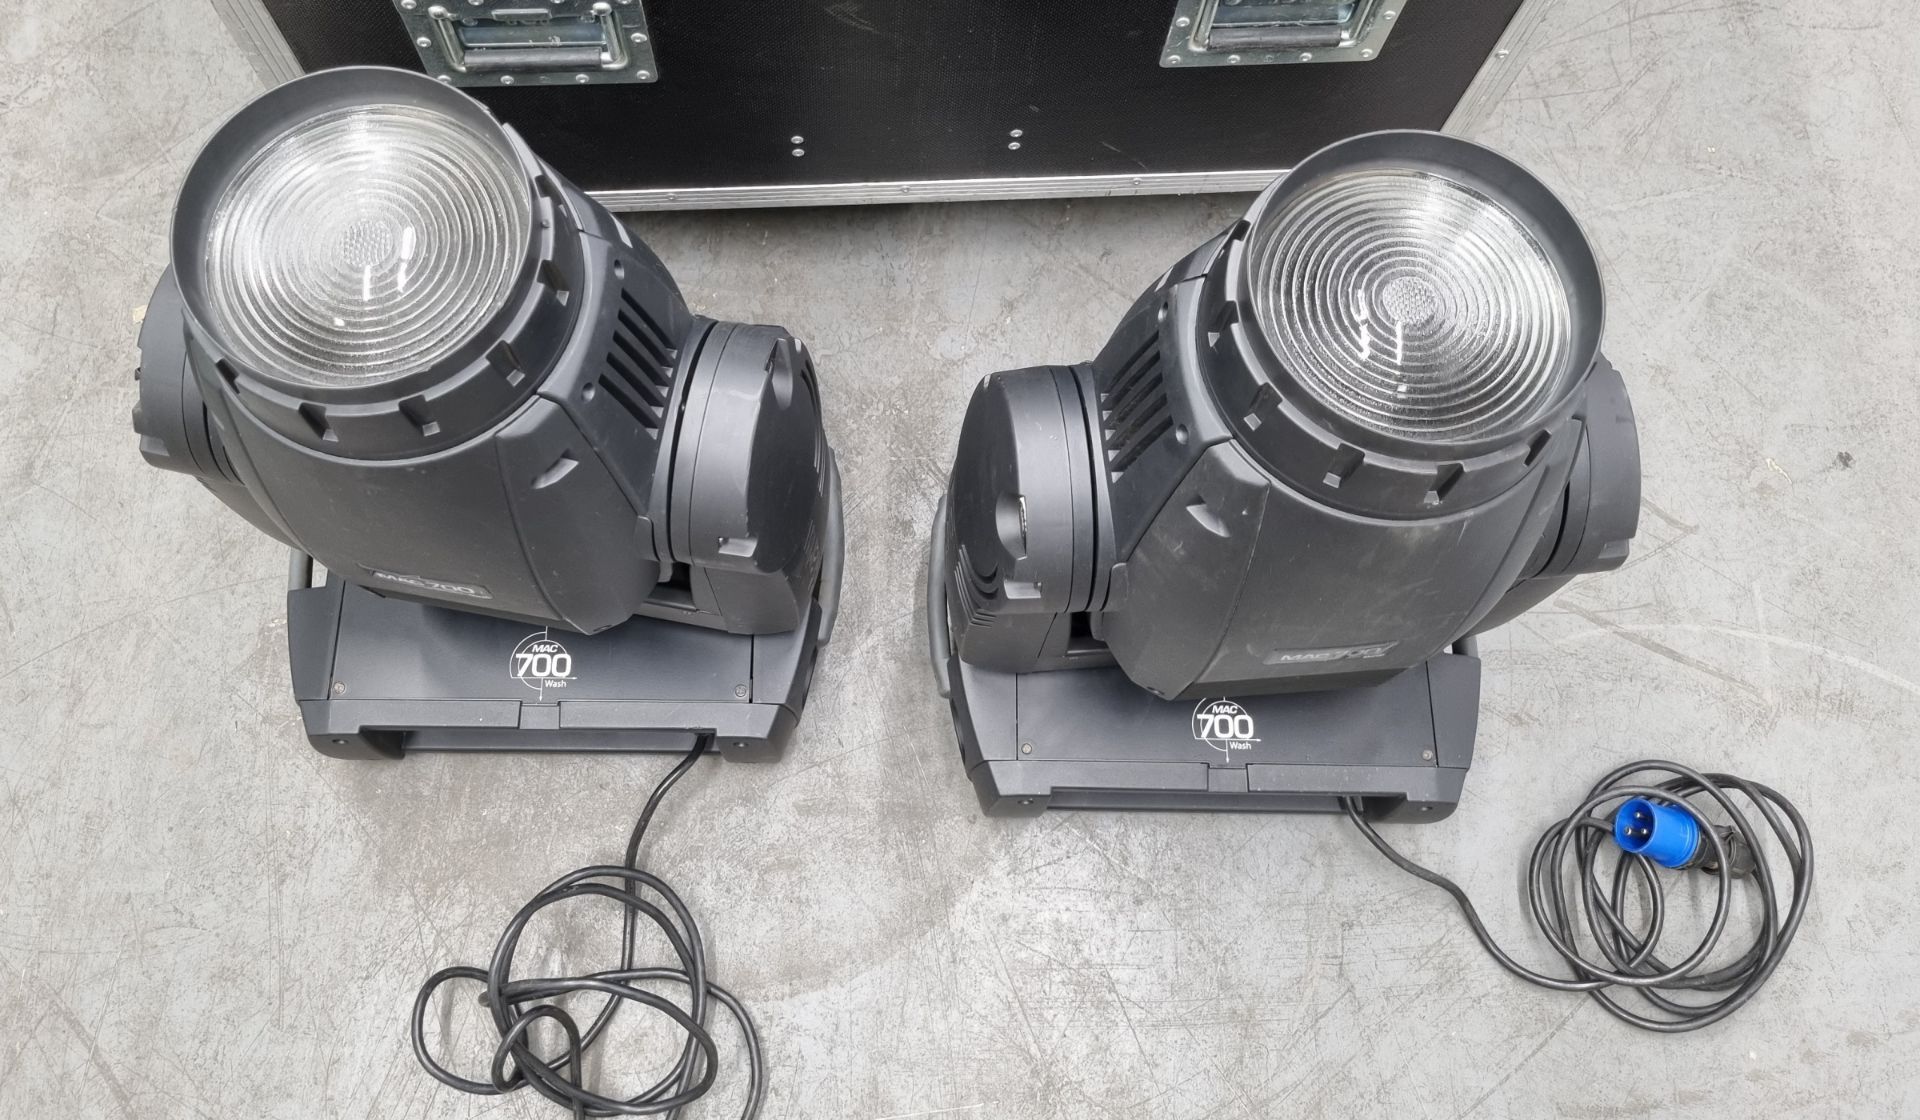 2x Martin MAC 700 Wash moving heads in flight case with Omega brackets, bonds and 16a plugs - Image 2 of 9